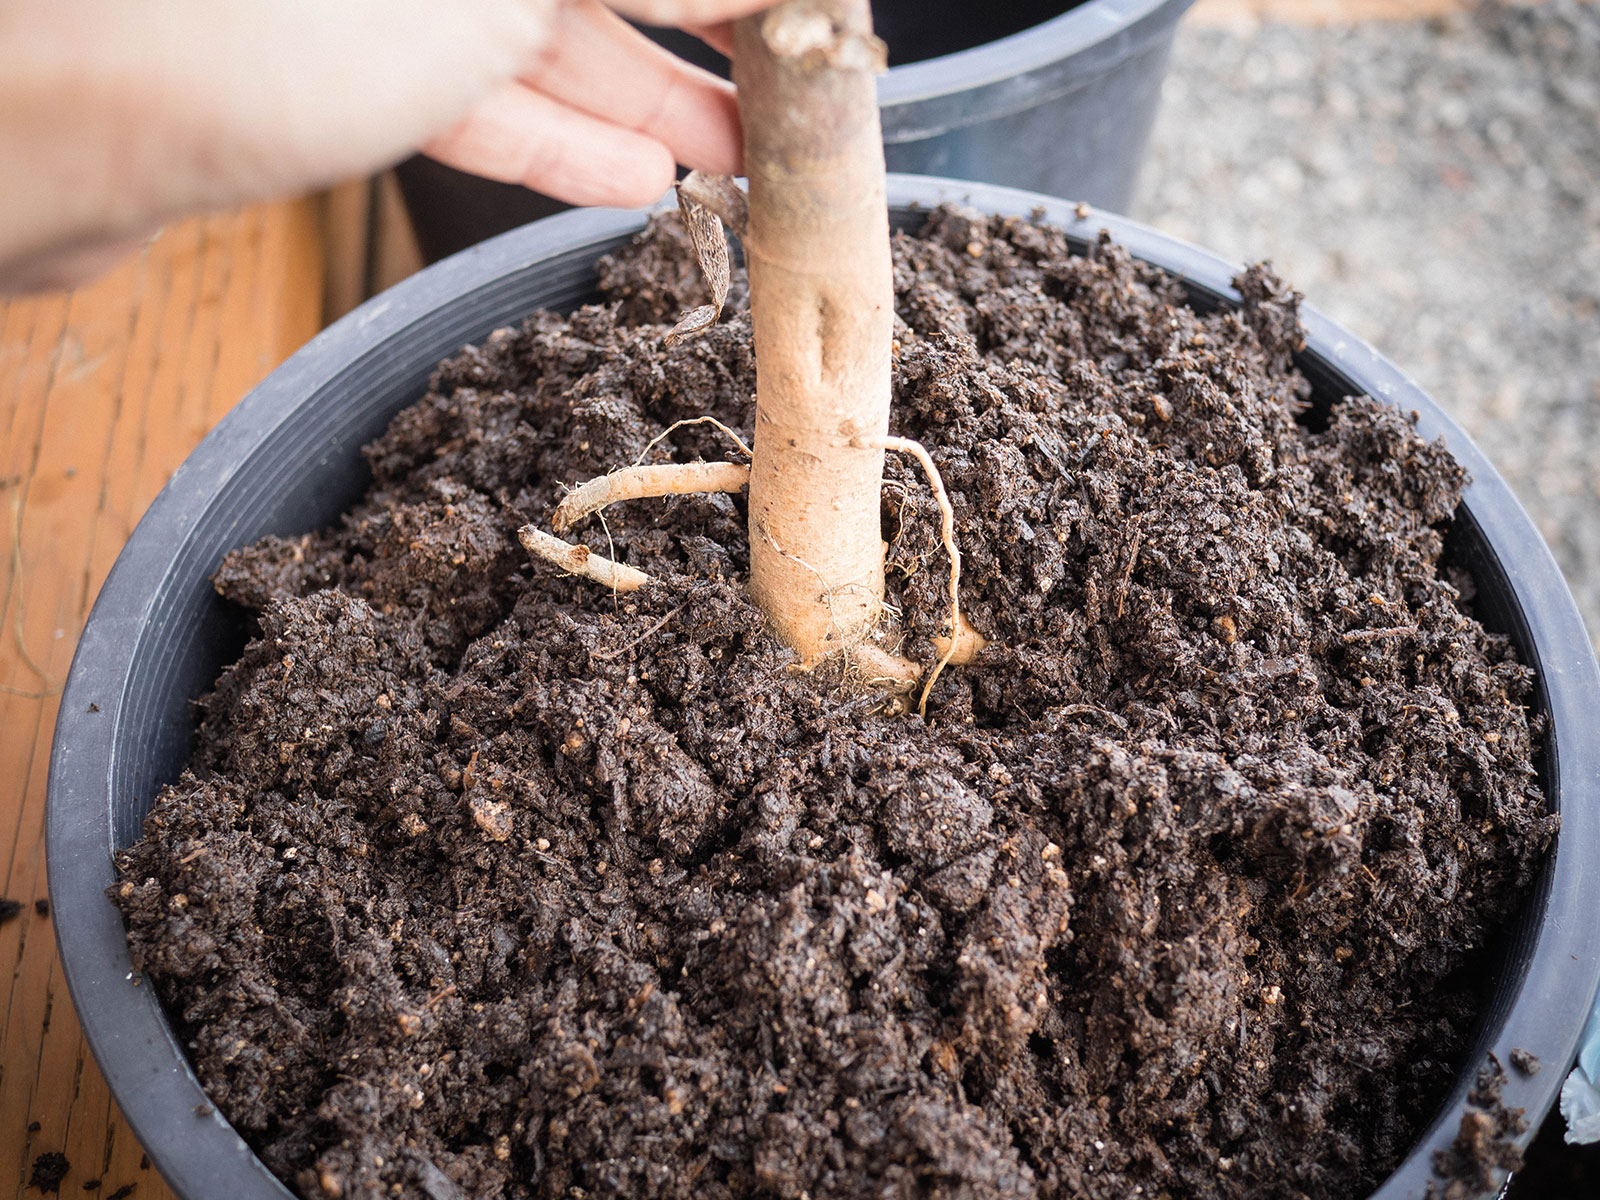 Close-up of a bare-root perennial being planted in potting soil with the crown just below the soil surface